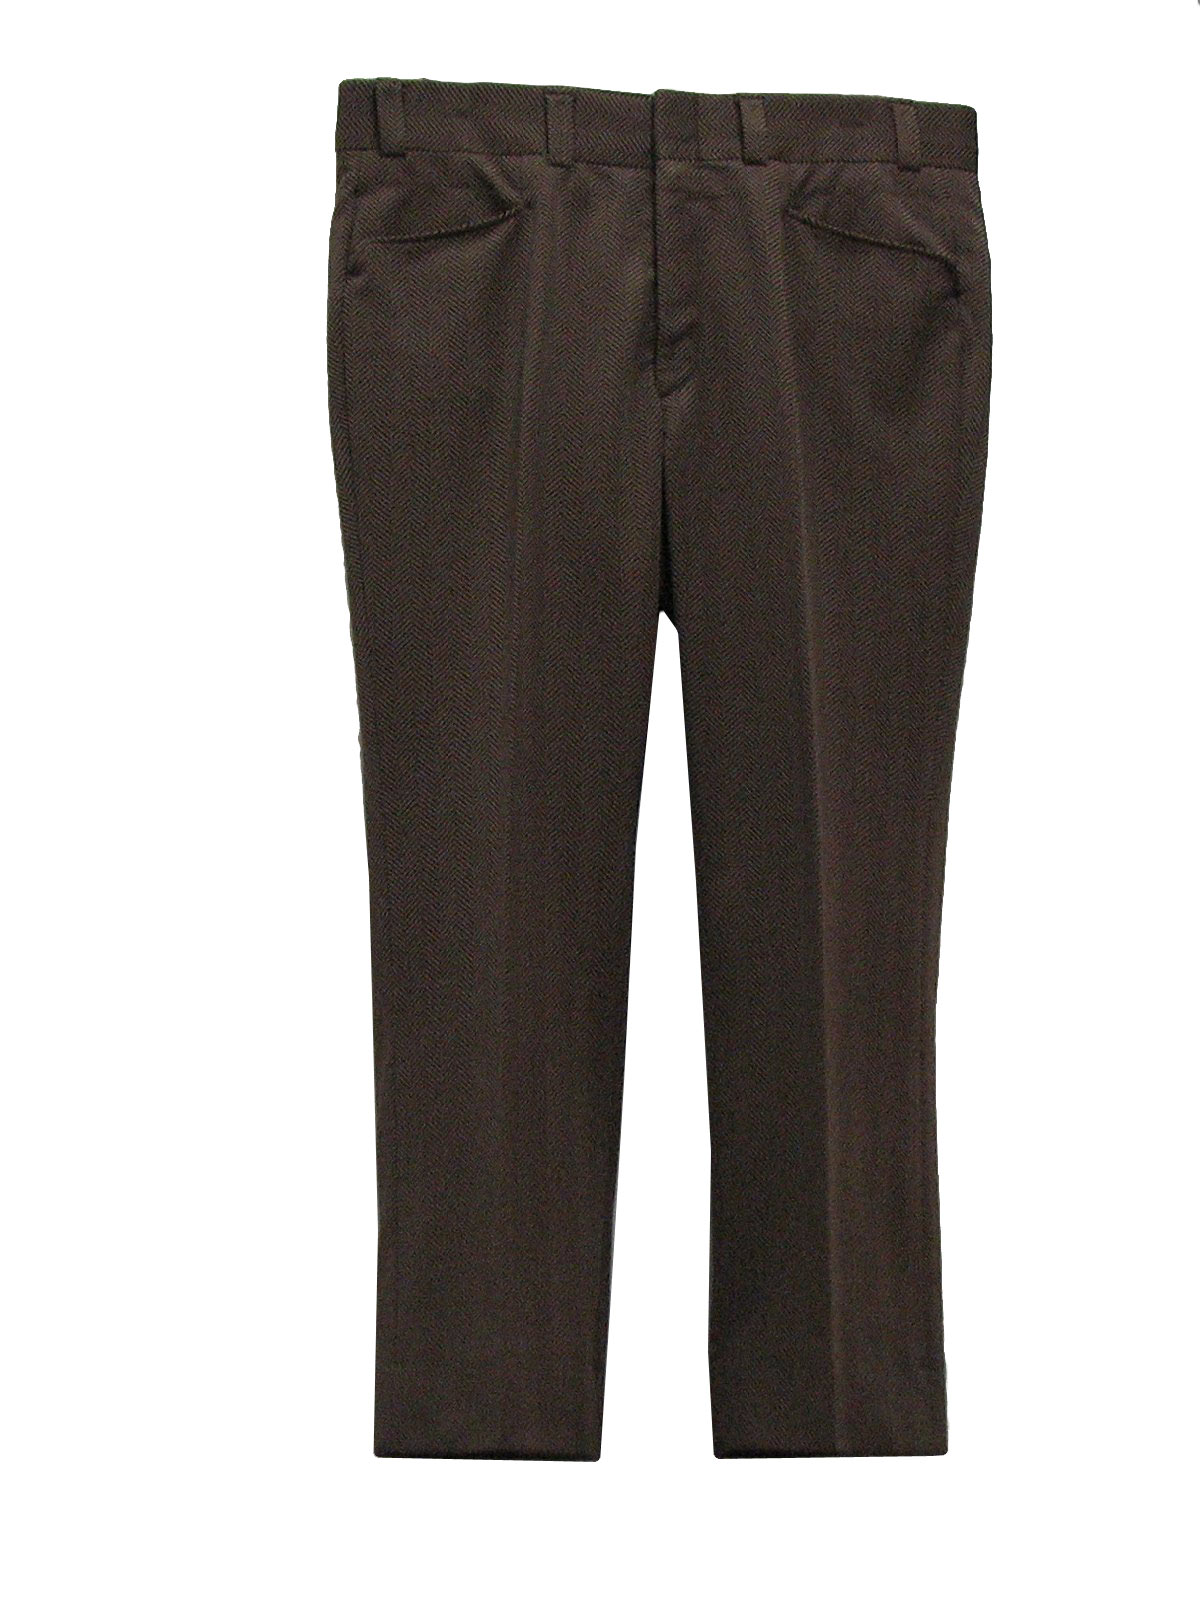 70s Retro Pants: 70s -No Label- Mens copper and chocolate brown ...